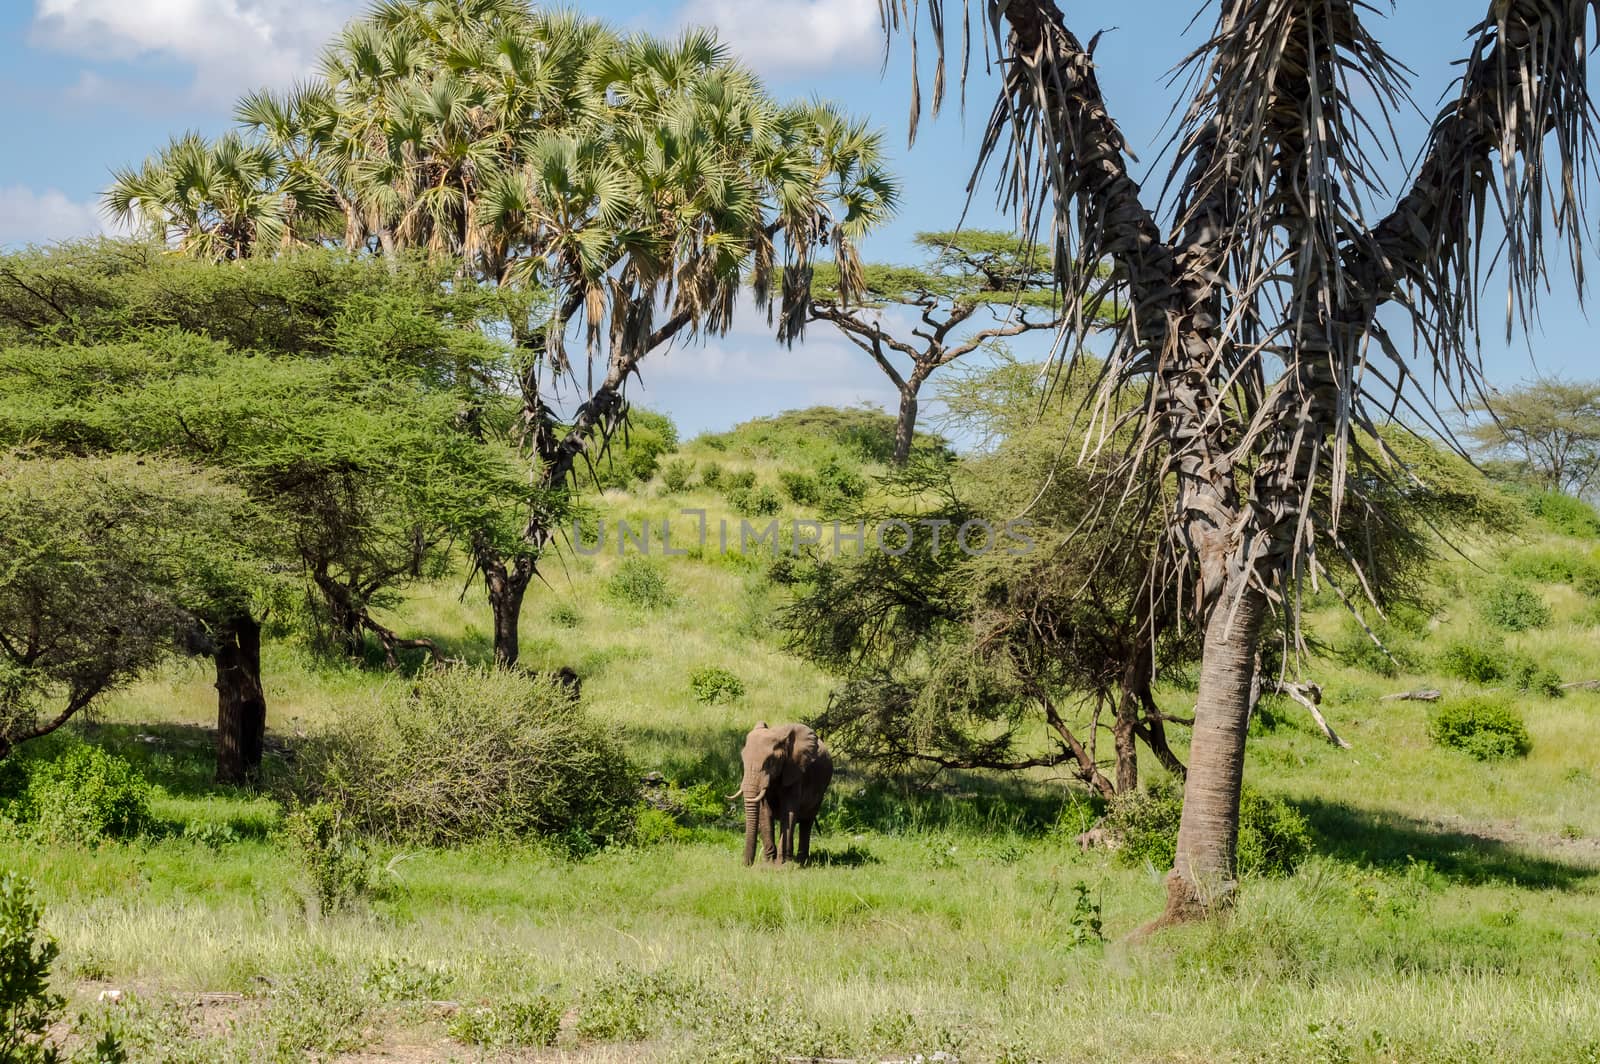 An isolated elephant in the natural habitat of the African savannah of Samburu Park in central Kenya